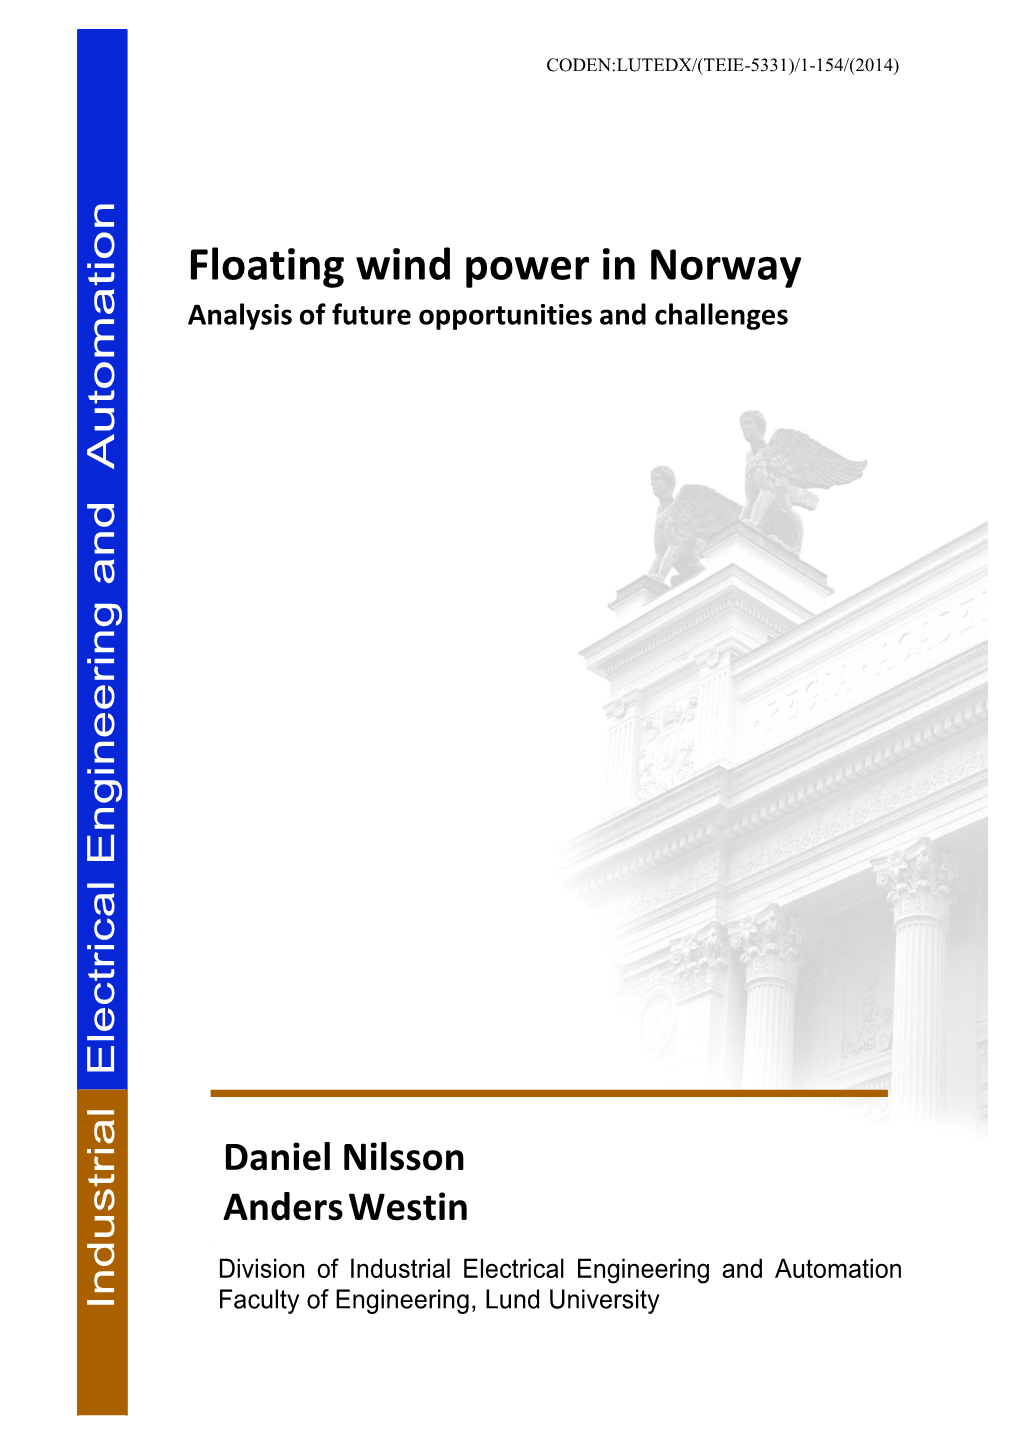 Analysis of Opportunities and Challenges for Norway to Establish